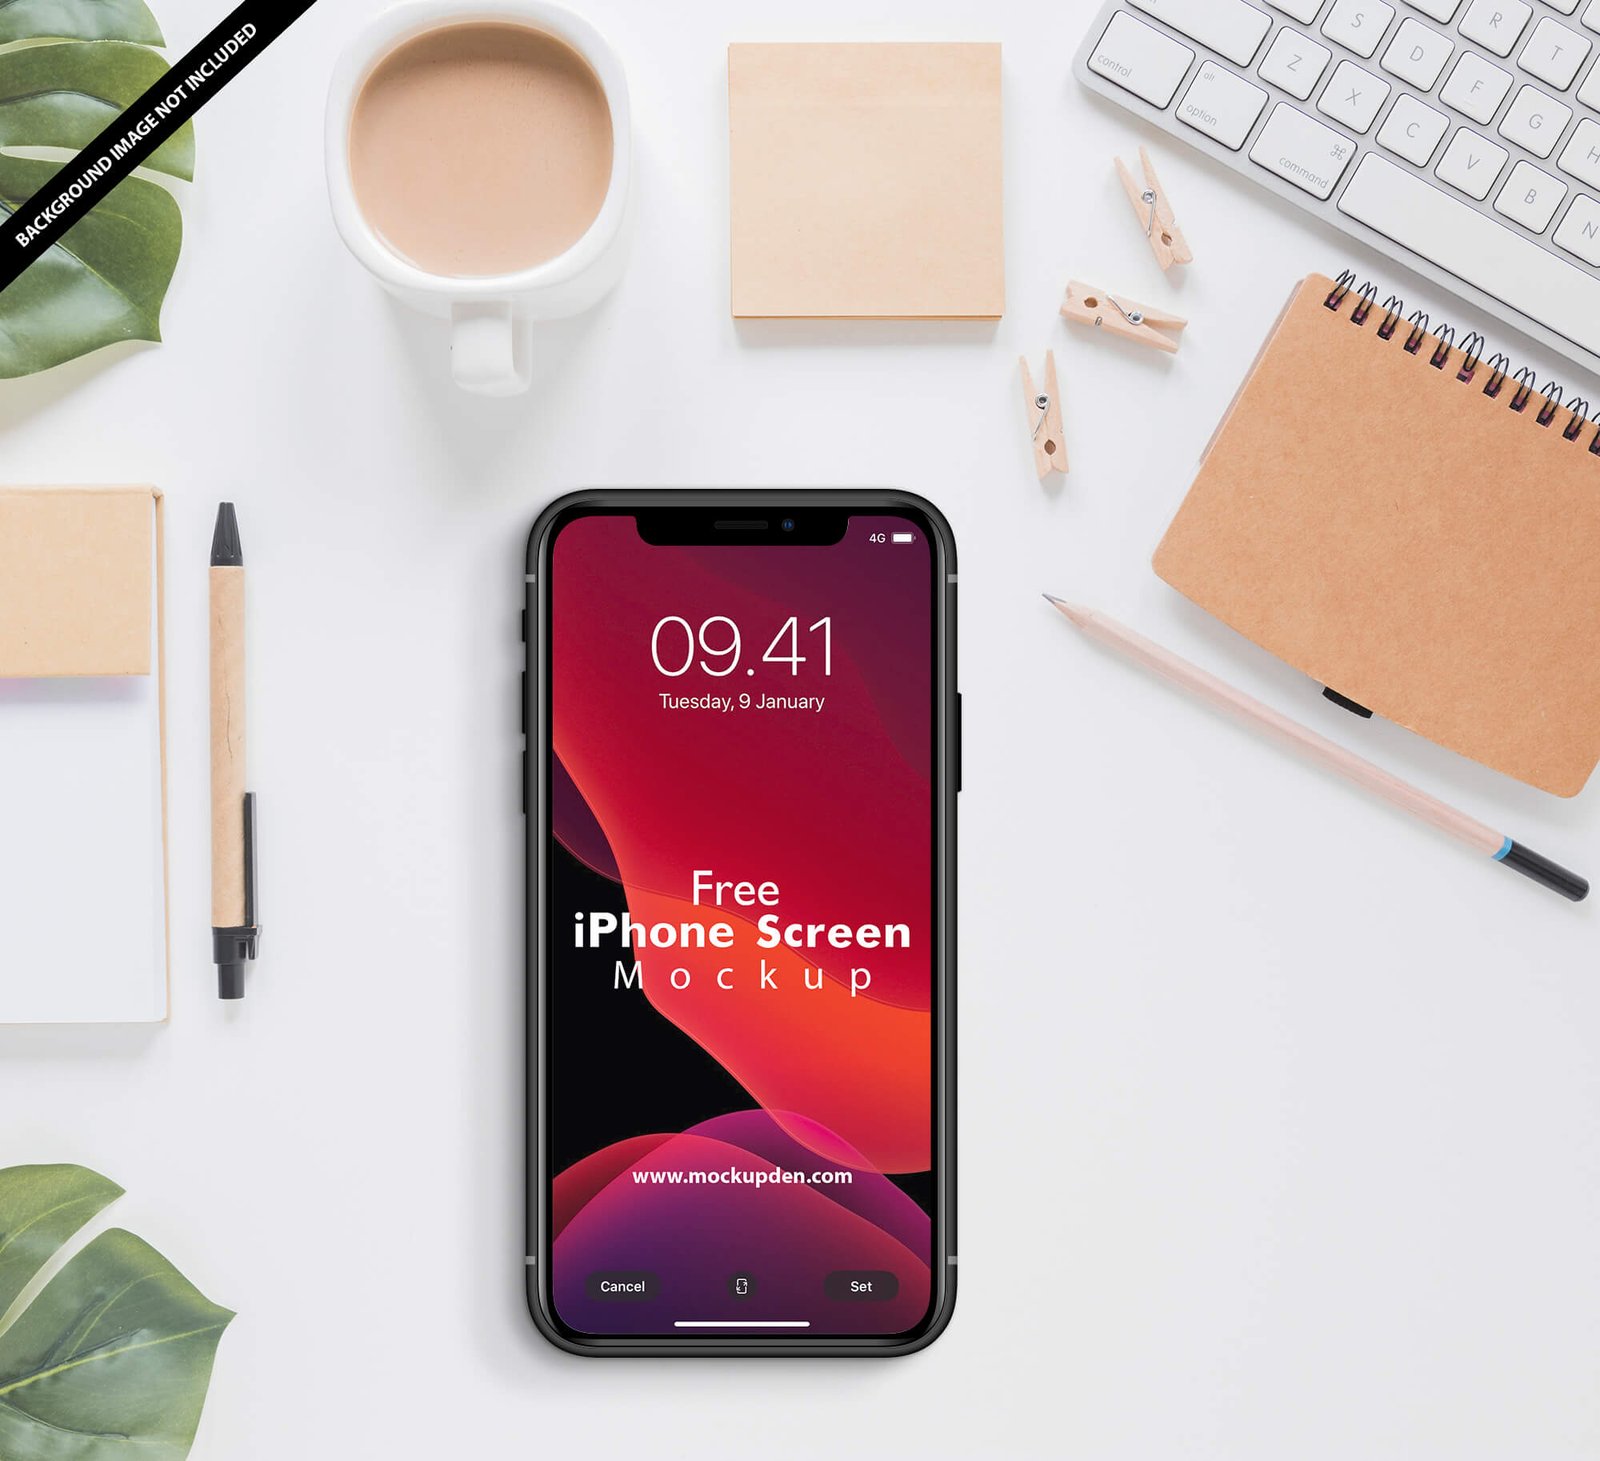 Download Free iPhone Screen mockup PSD Template - Mockupden